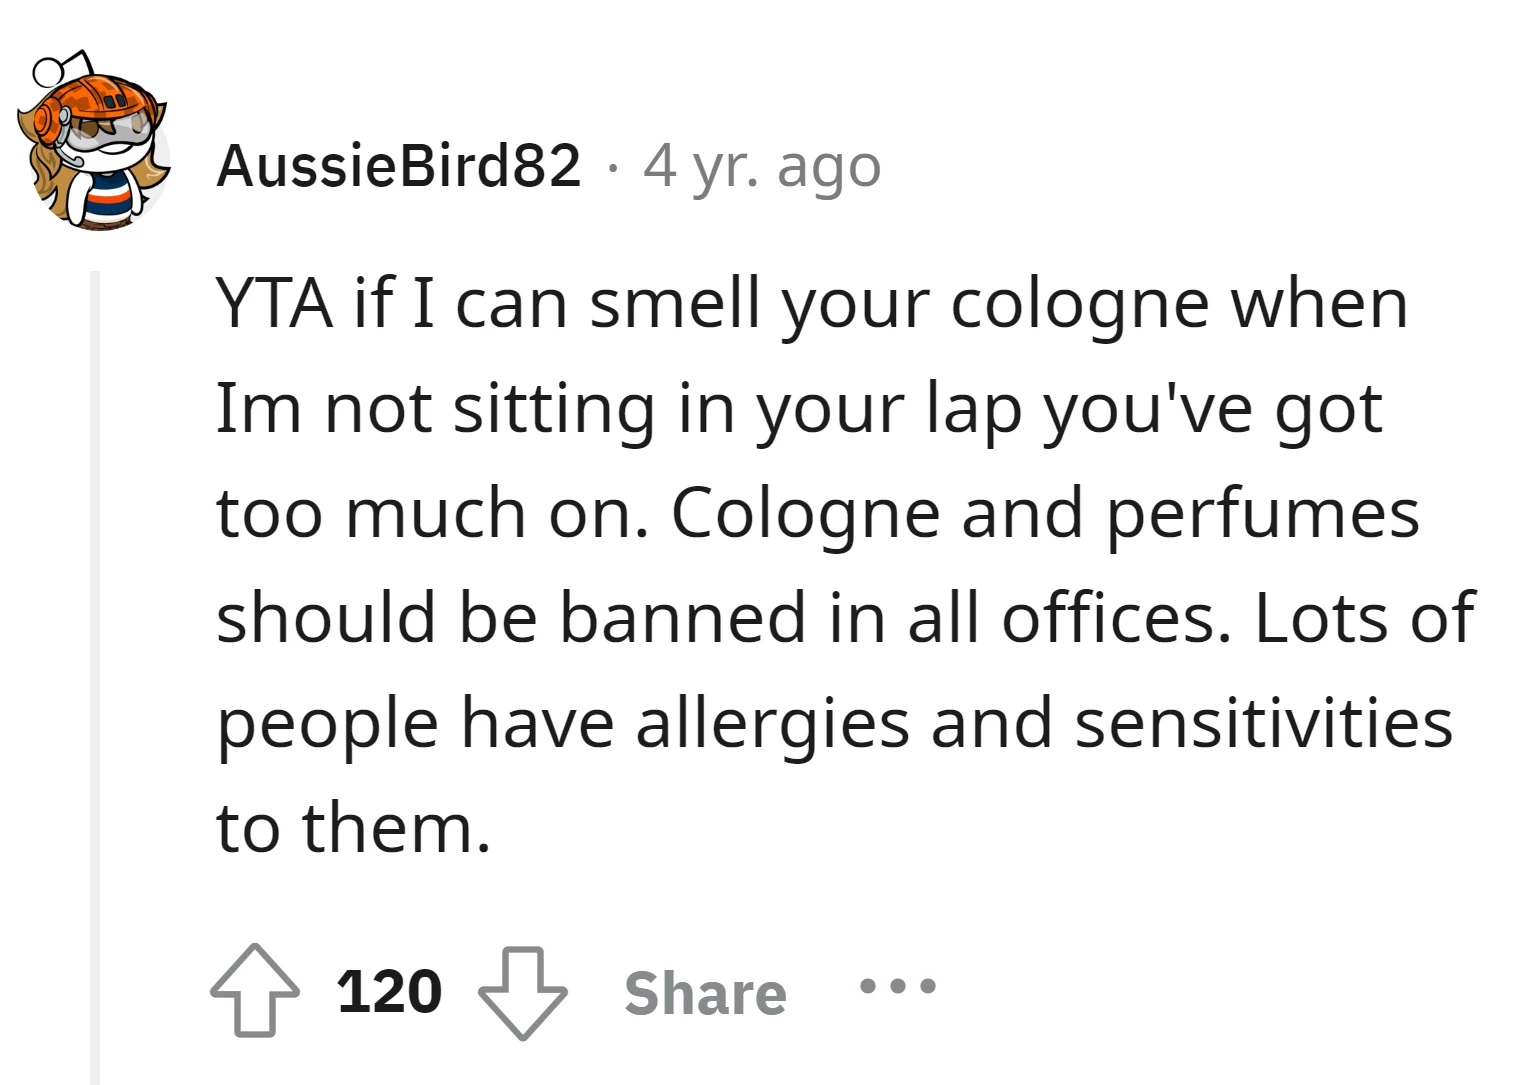 Strong cologne or perfumes in office settings should be banned